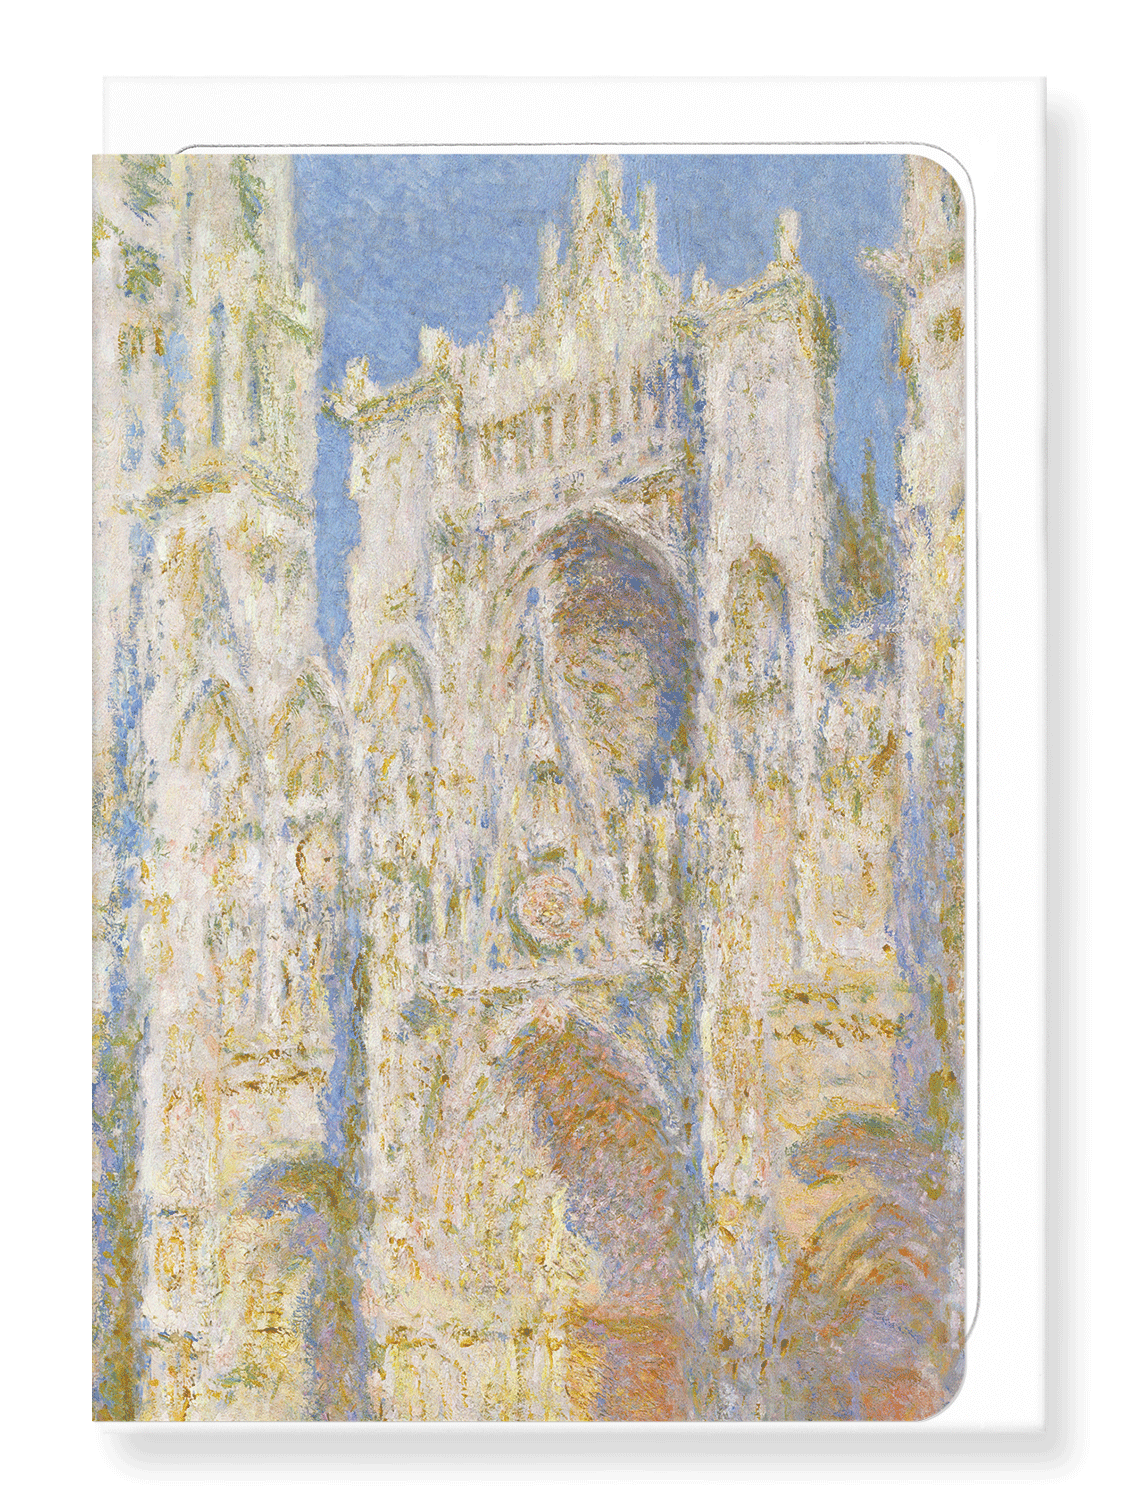 Ezen Designs - Rouen cathedral west façade by monet - Greeting Card - Front